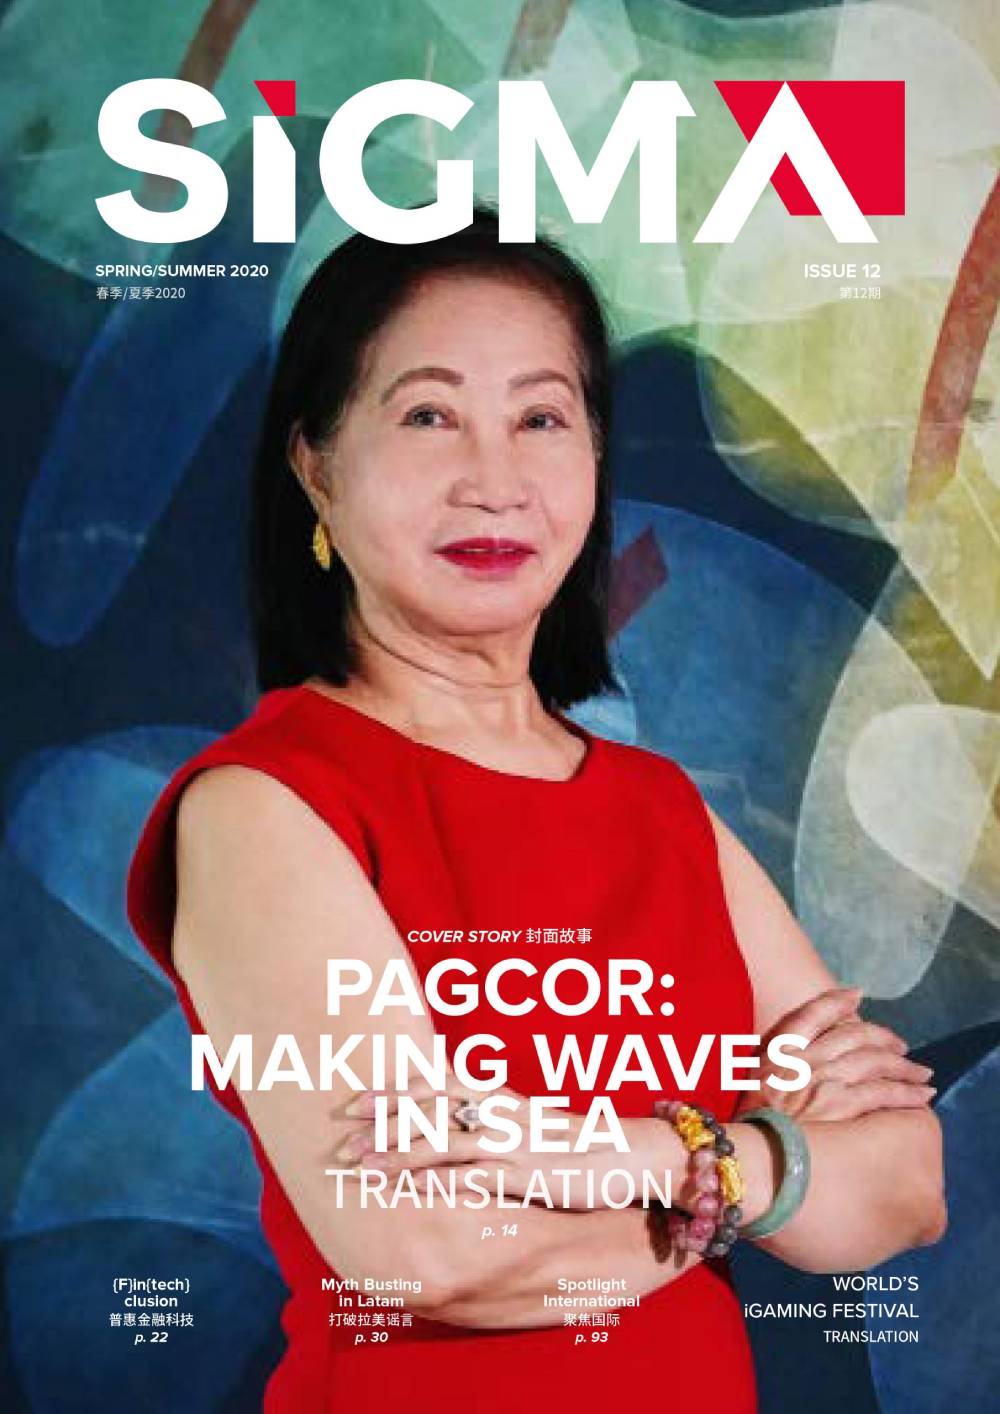 SiGMA Issue 12: PAGCOR: making waves in sea